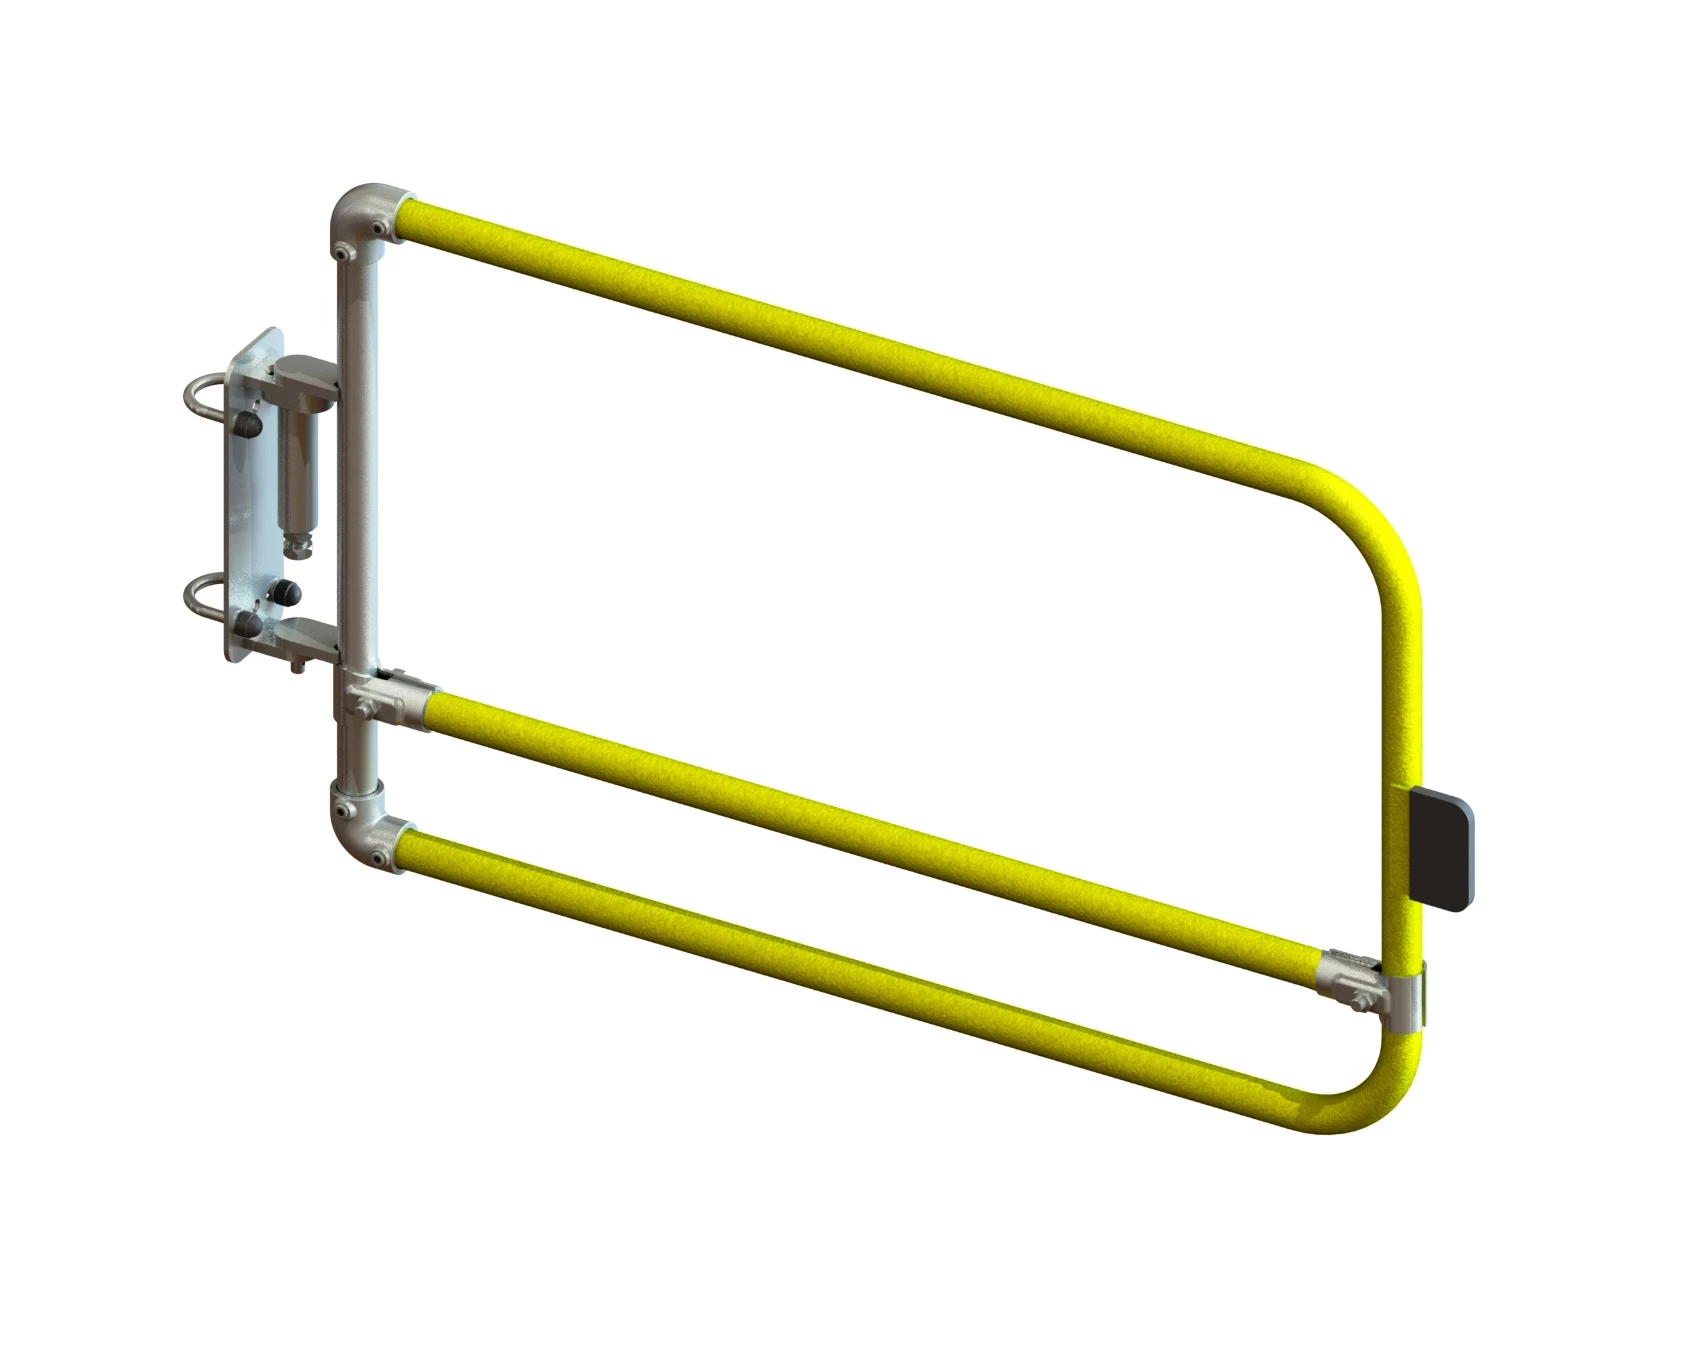 Kee Gate | self closing safety gate | industrial safety gate | spring loaded safety gate | kee klamp gate | key clamp gate